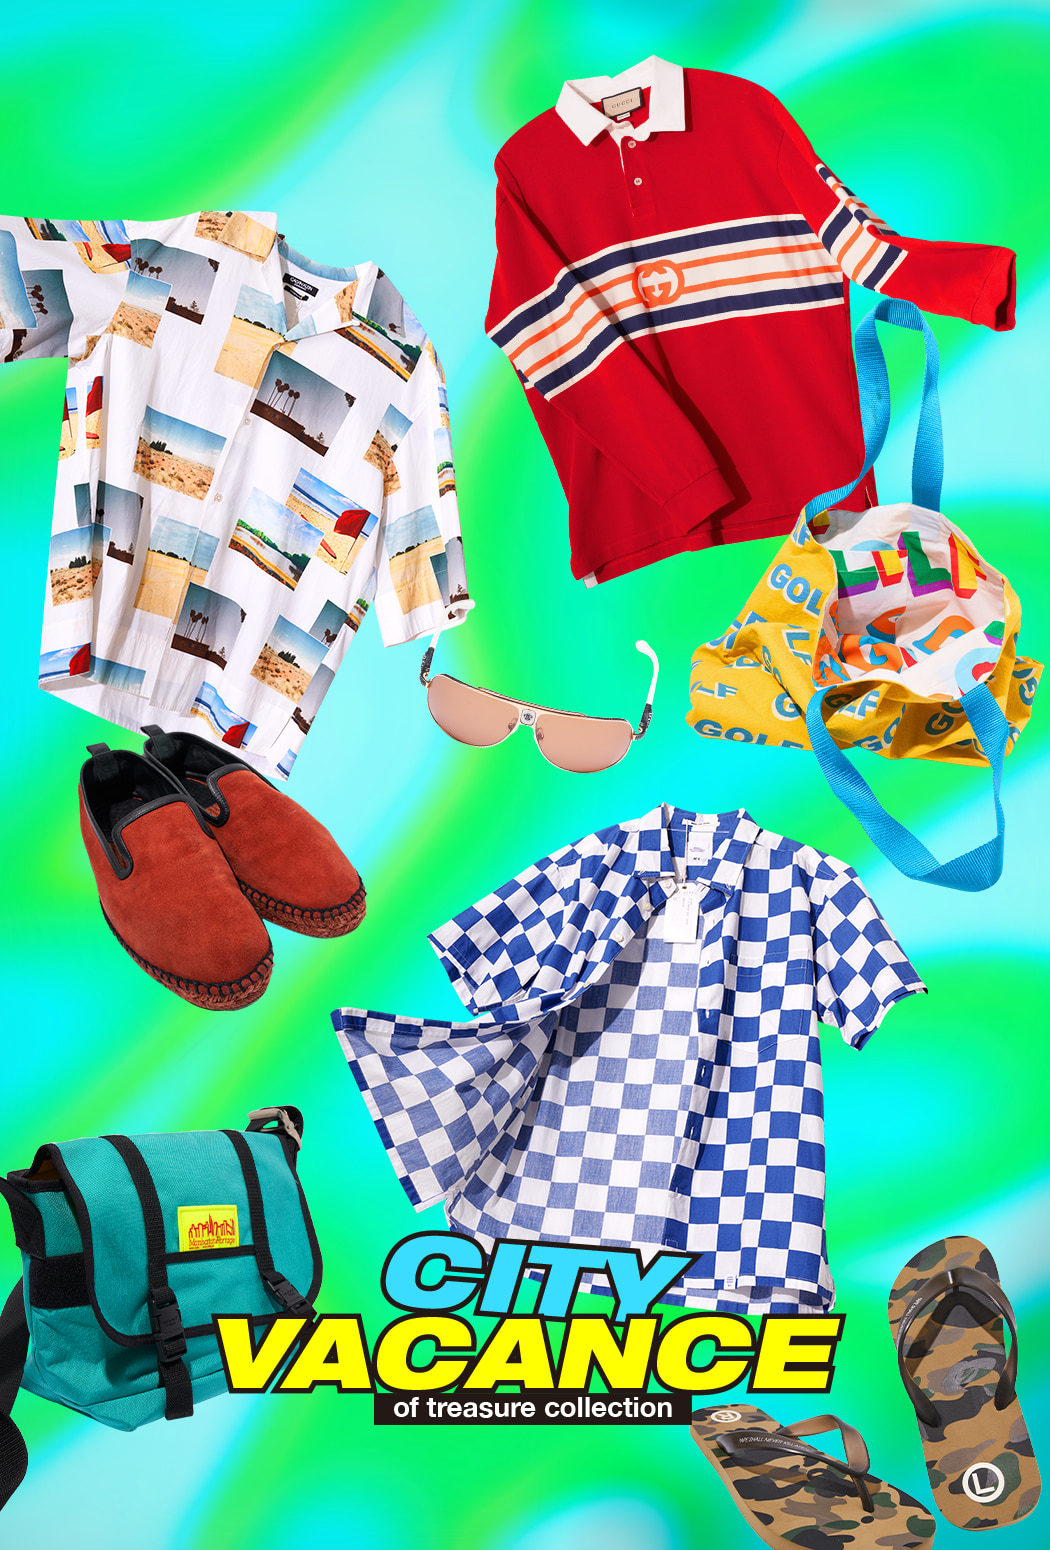 CITY VACANCE of treasure collection